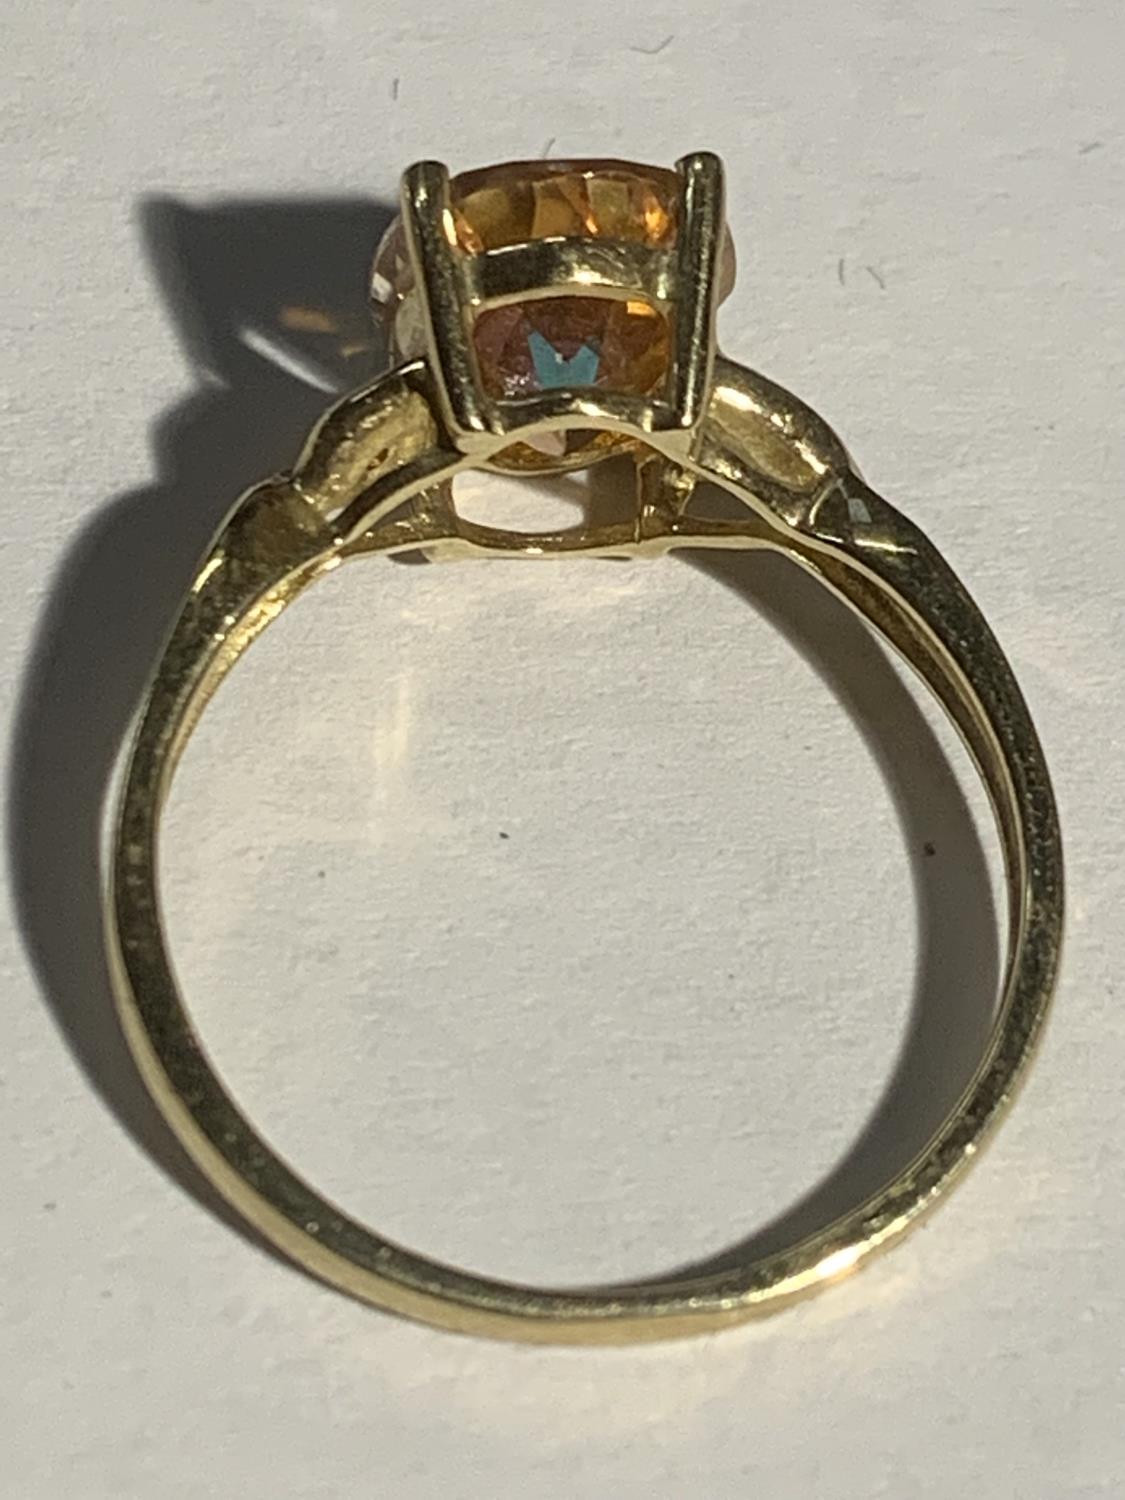 A 9 CARAT GOLD RING WITH A LARGE MULTI COLOURED STONE SIZE P GROSS WEIGHT 2.3 GRAMS - Image 3 of 3